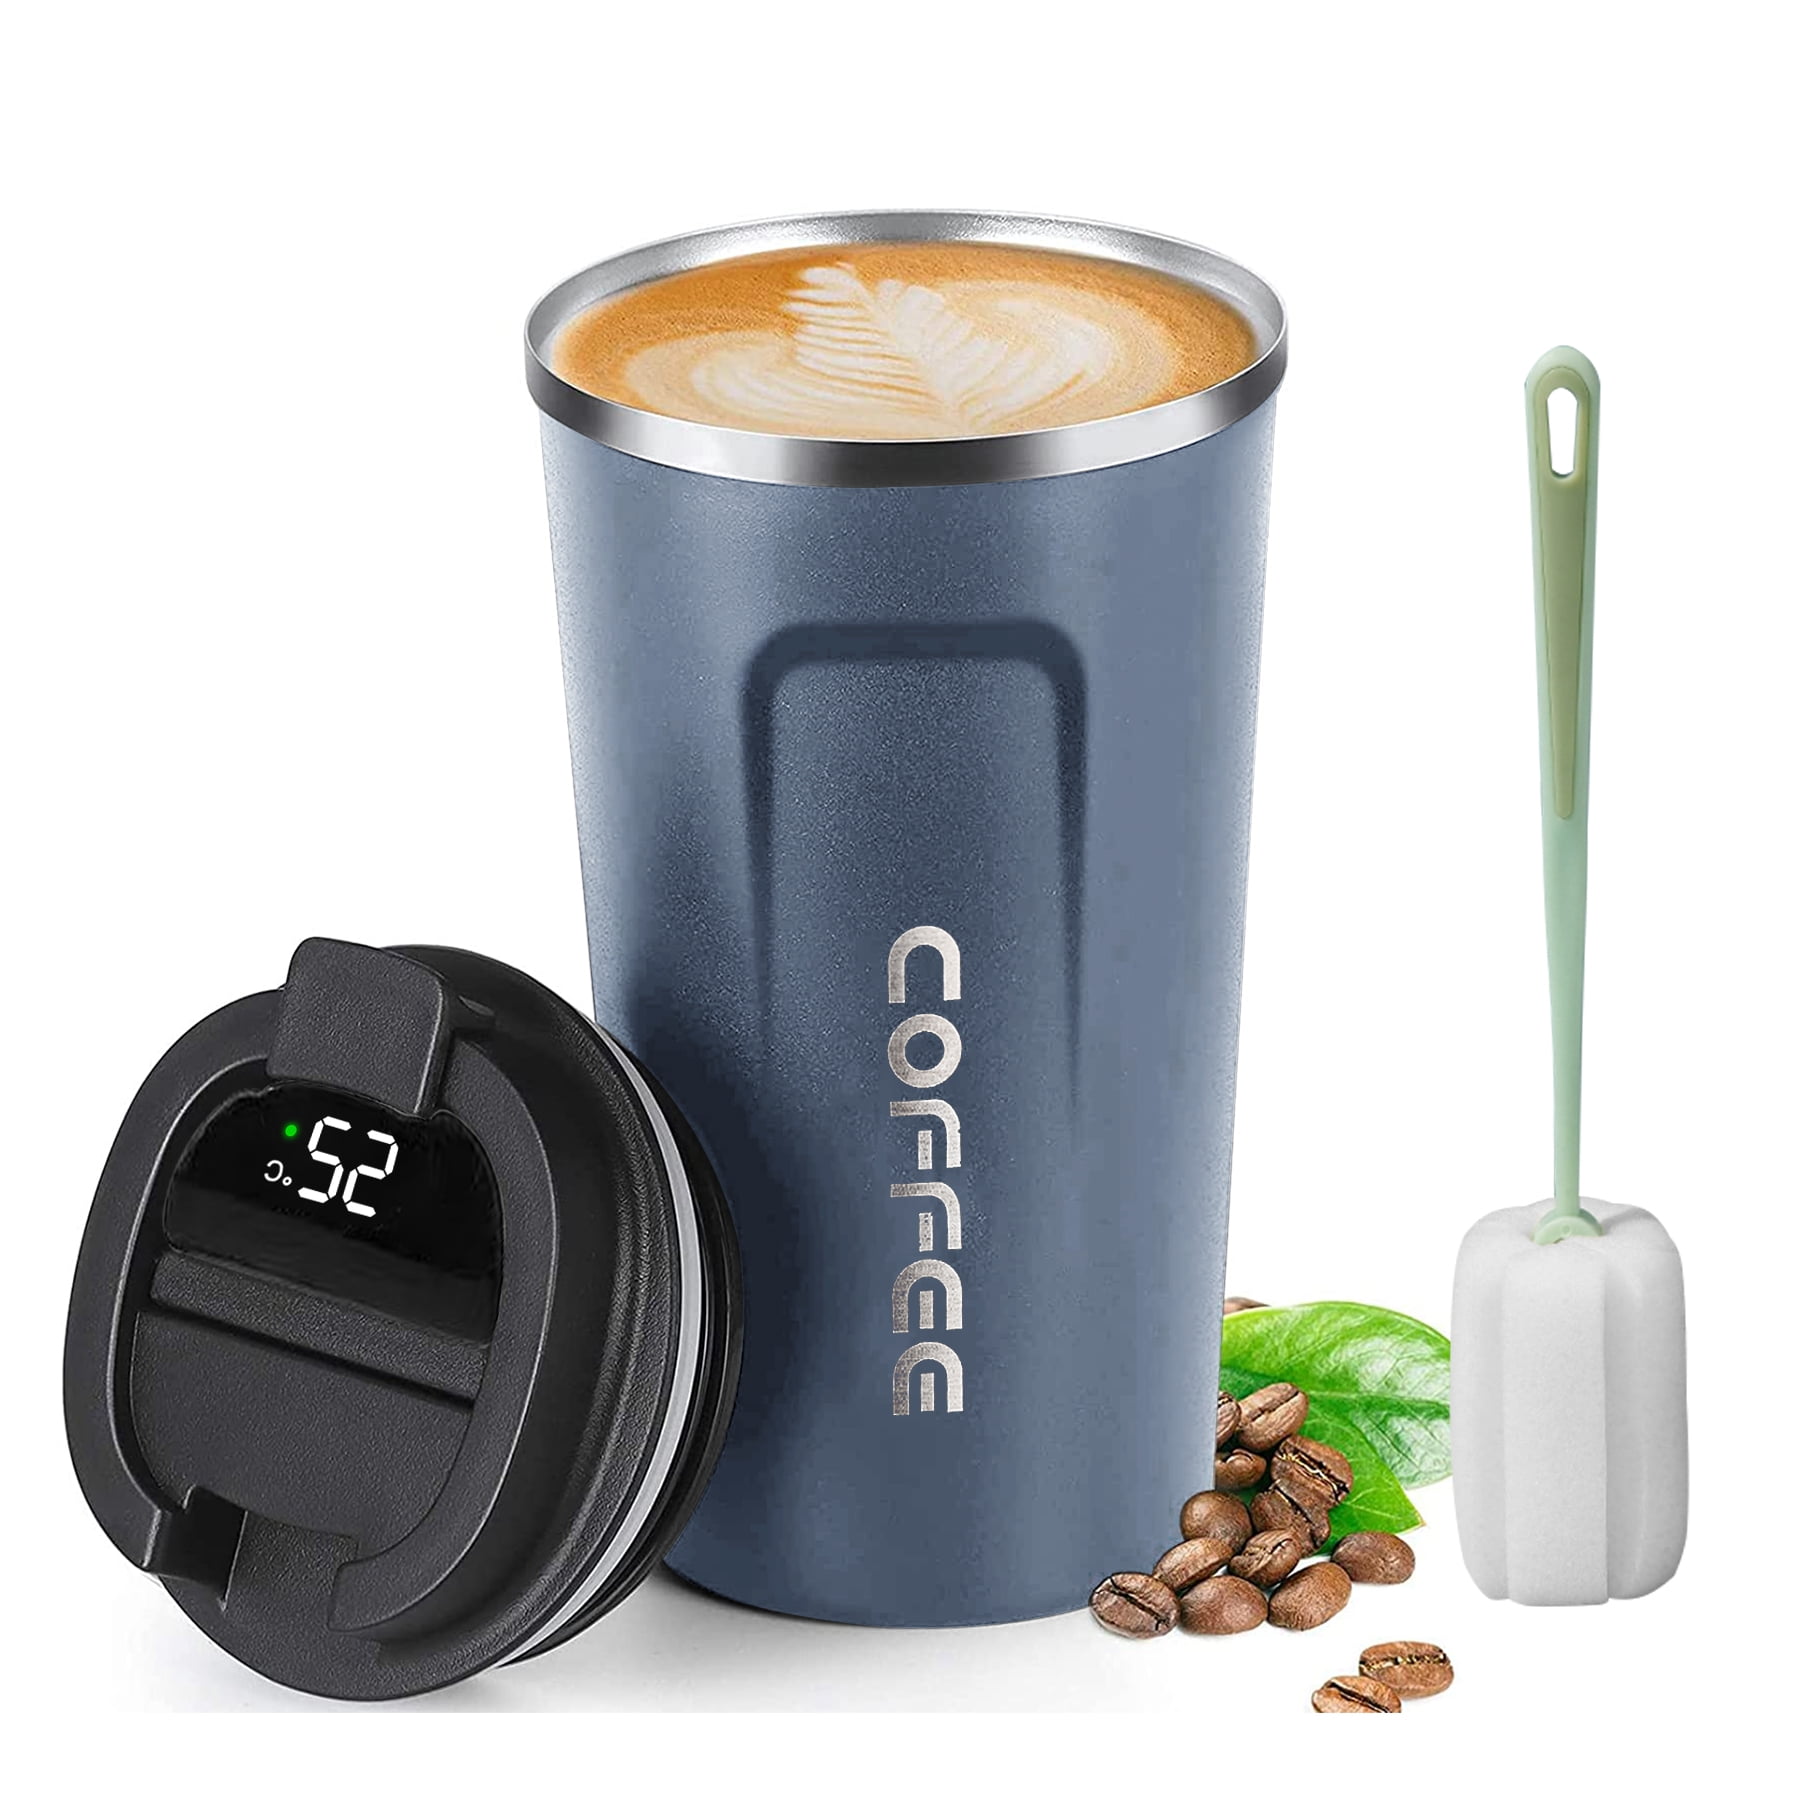 17oz/510mL Thermos Cup/Coffee Cup with Digital Thermometer for Keep Hot/Ice  Coffee,Tea and Beer, Stainless Steel Vacuum Insulated Mug Spill Proof with